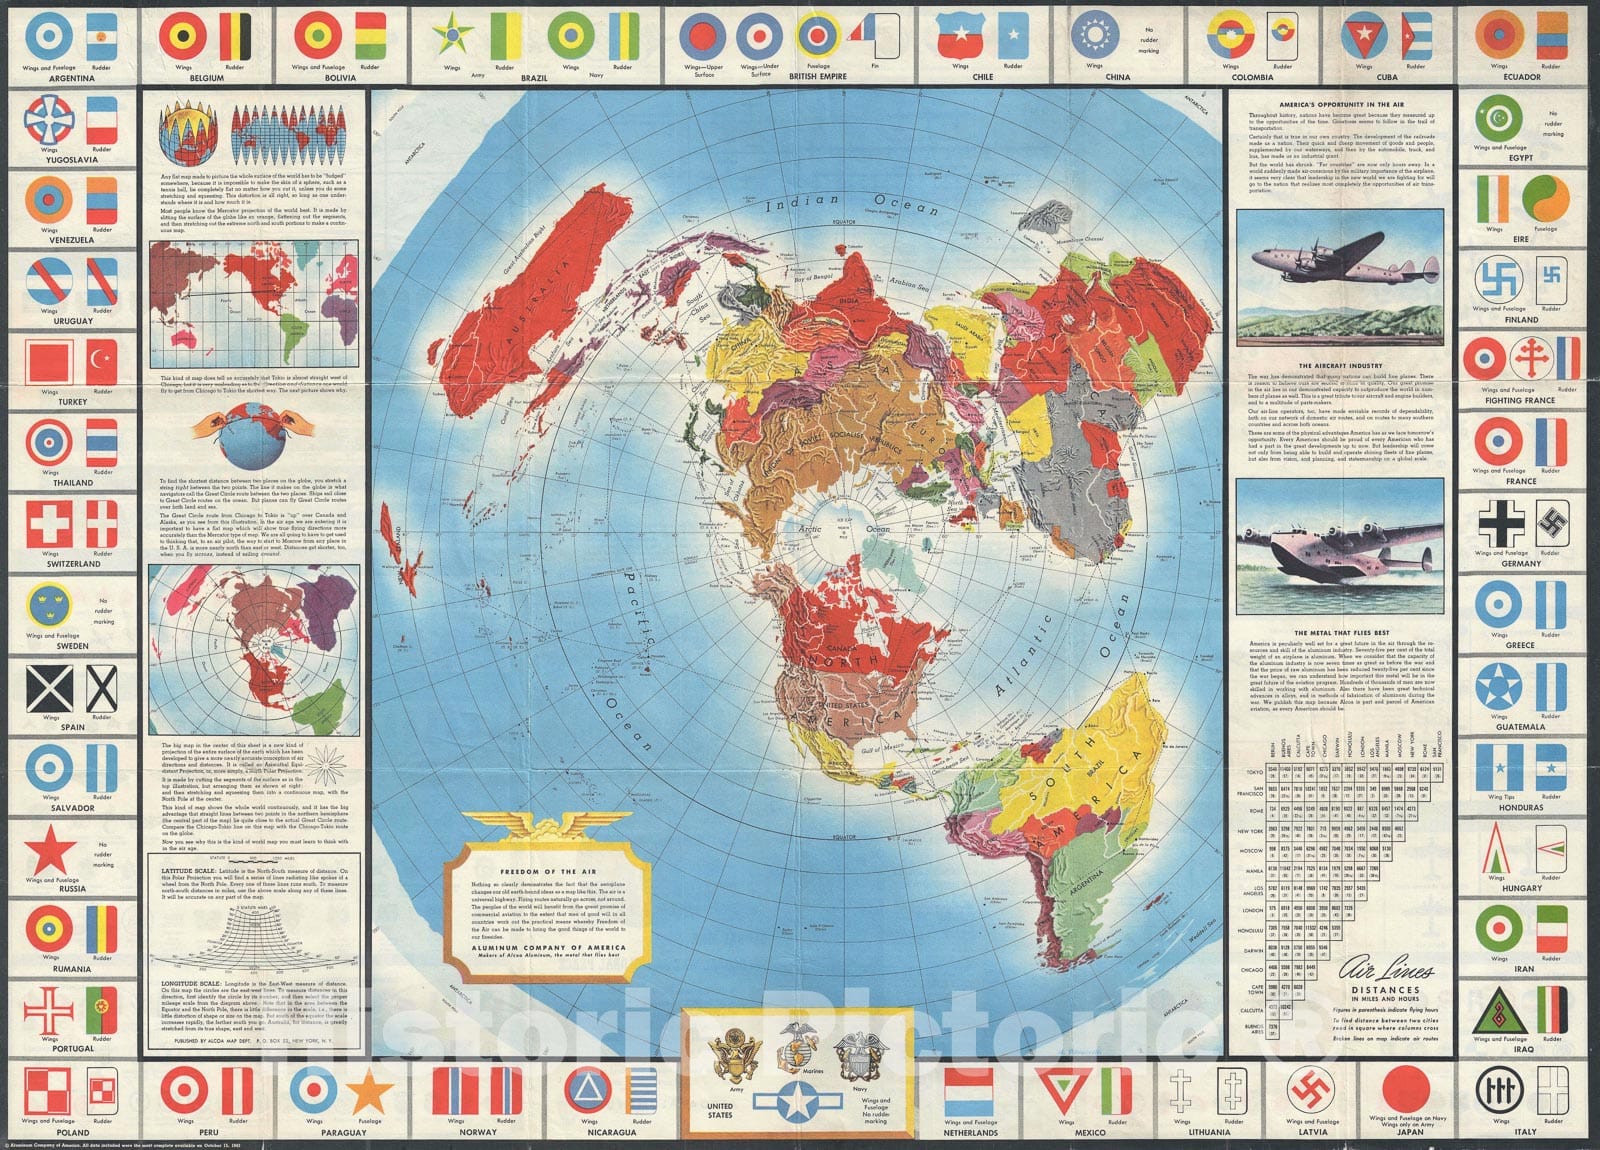 Historic Map : The World, Petruccelli, 1943 v2, Vintage Wall Art